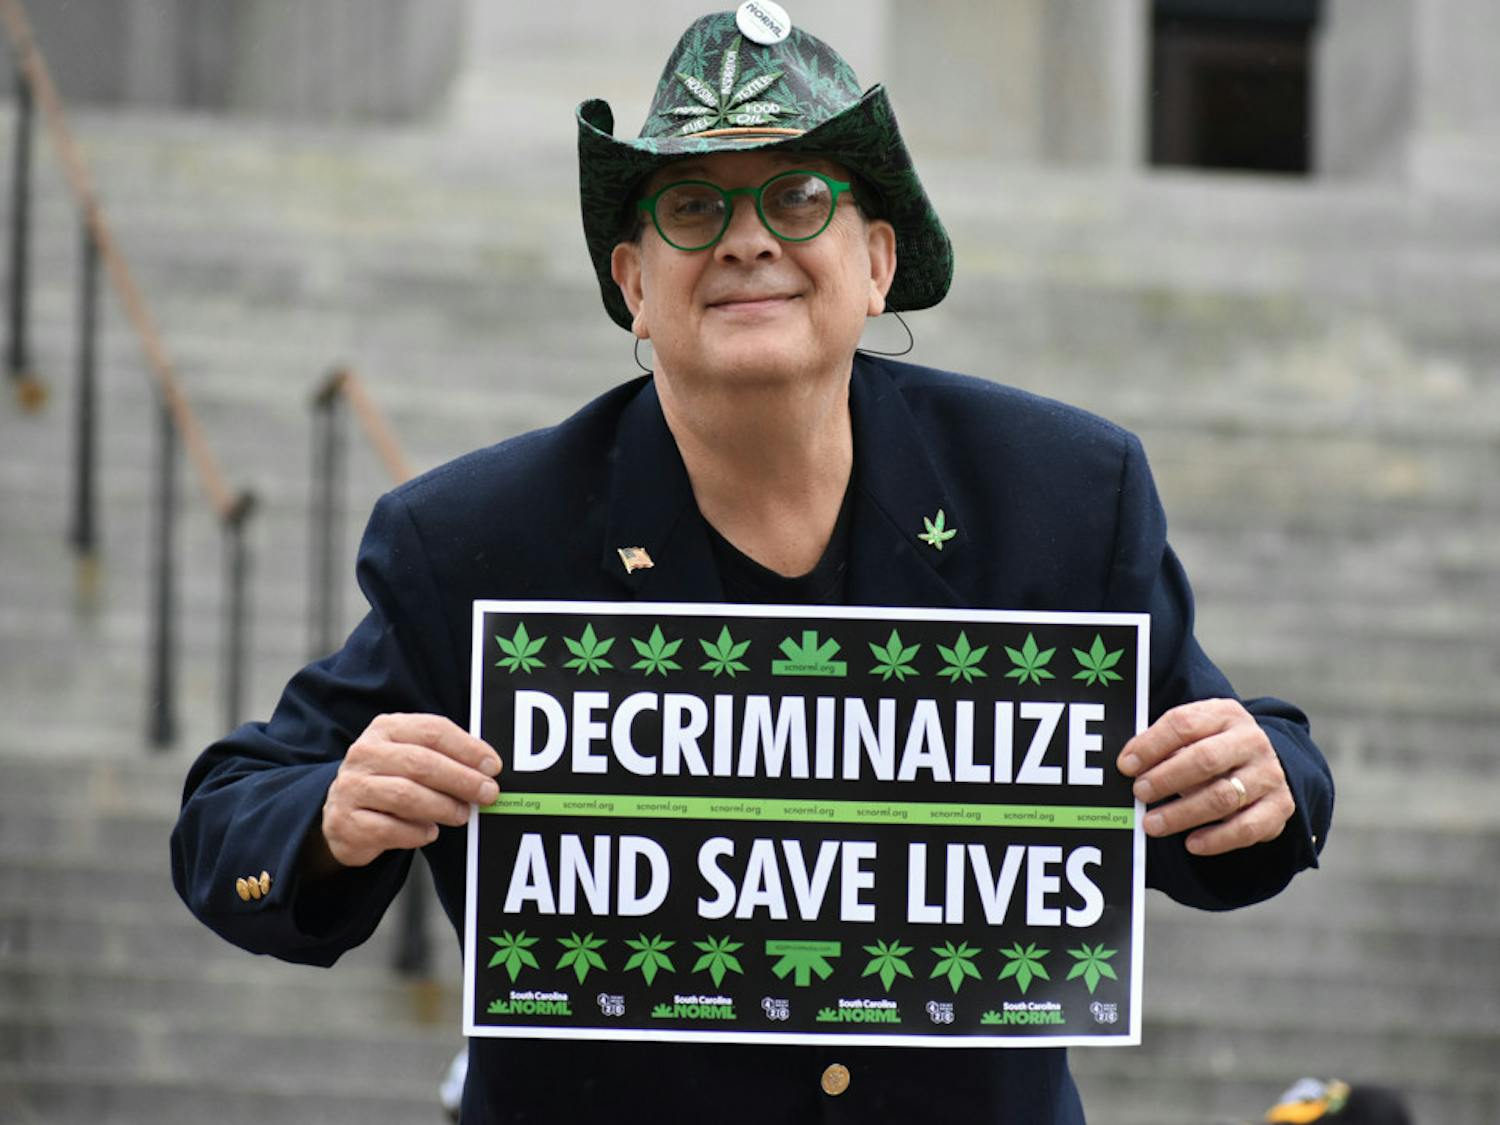 Scott Weldon holds a sign advocating for medical cannabis use. Weldon is the executive director for SC NORML.